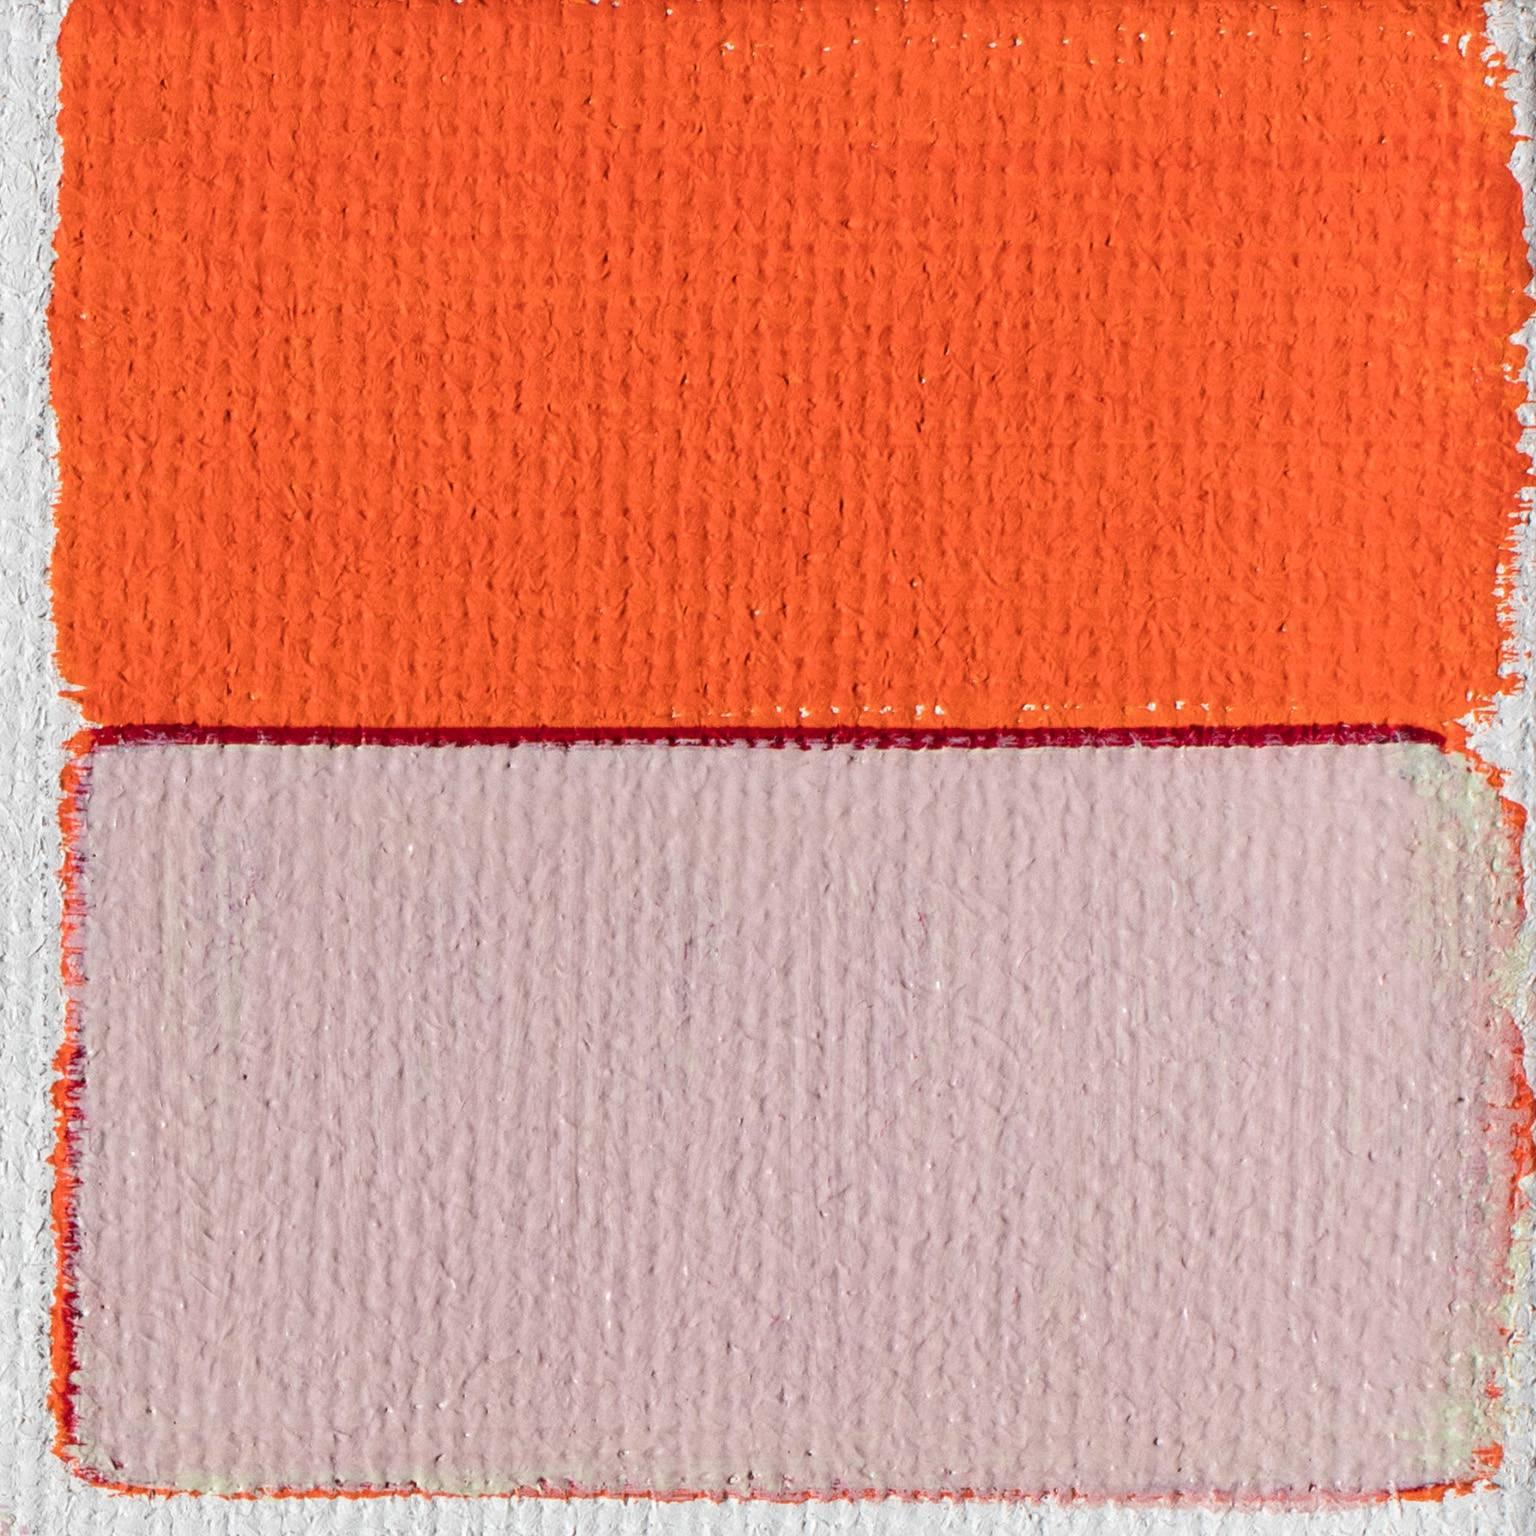 Roberto Caracciolo's Untitled (1) is a 11.75 x 11.75 geometric abstract oil painting. The main colors are red and orange. Rectangles and squares rhythmically dialogue across the canvas. The strong red burgundy and orange rectangles set the mood.